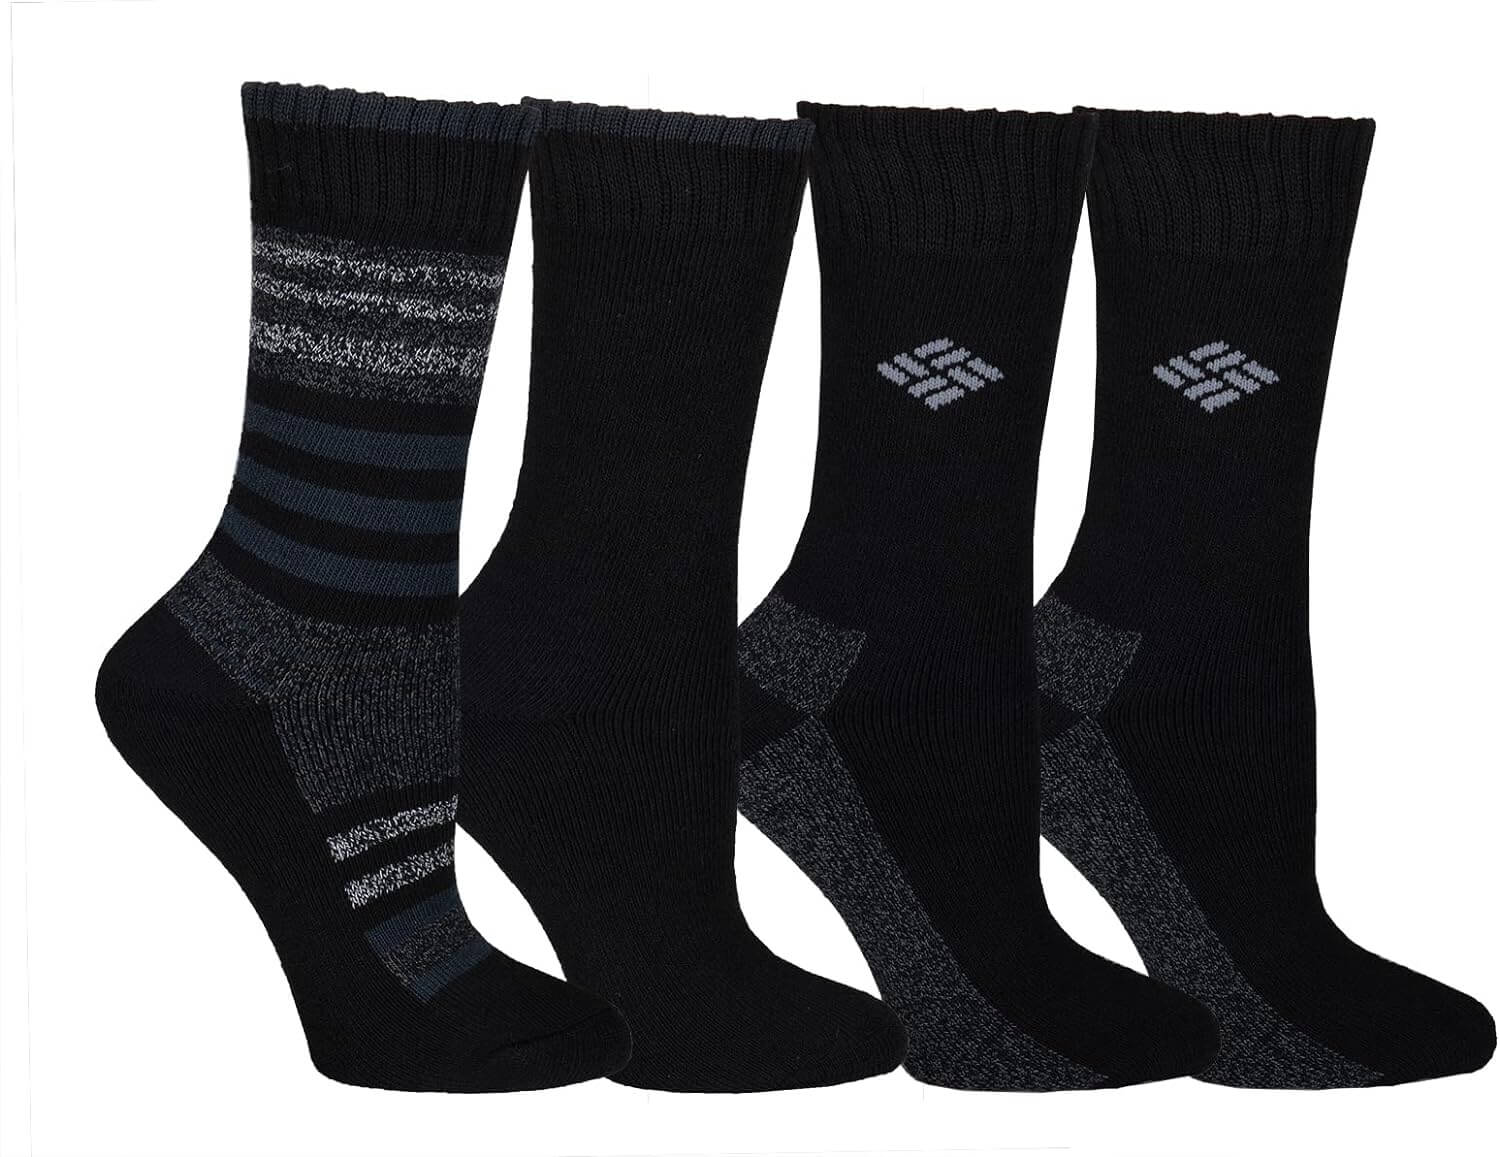 Shop The Latest >Columbia Women's 4 Pack Moisture Control Crew Socks > *Only $29.84*> From The Top Brand > *Columbial* > Shop Now and Get Free Shipping On Orders Over $45.00 >*Shop Earth Foot*